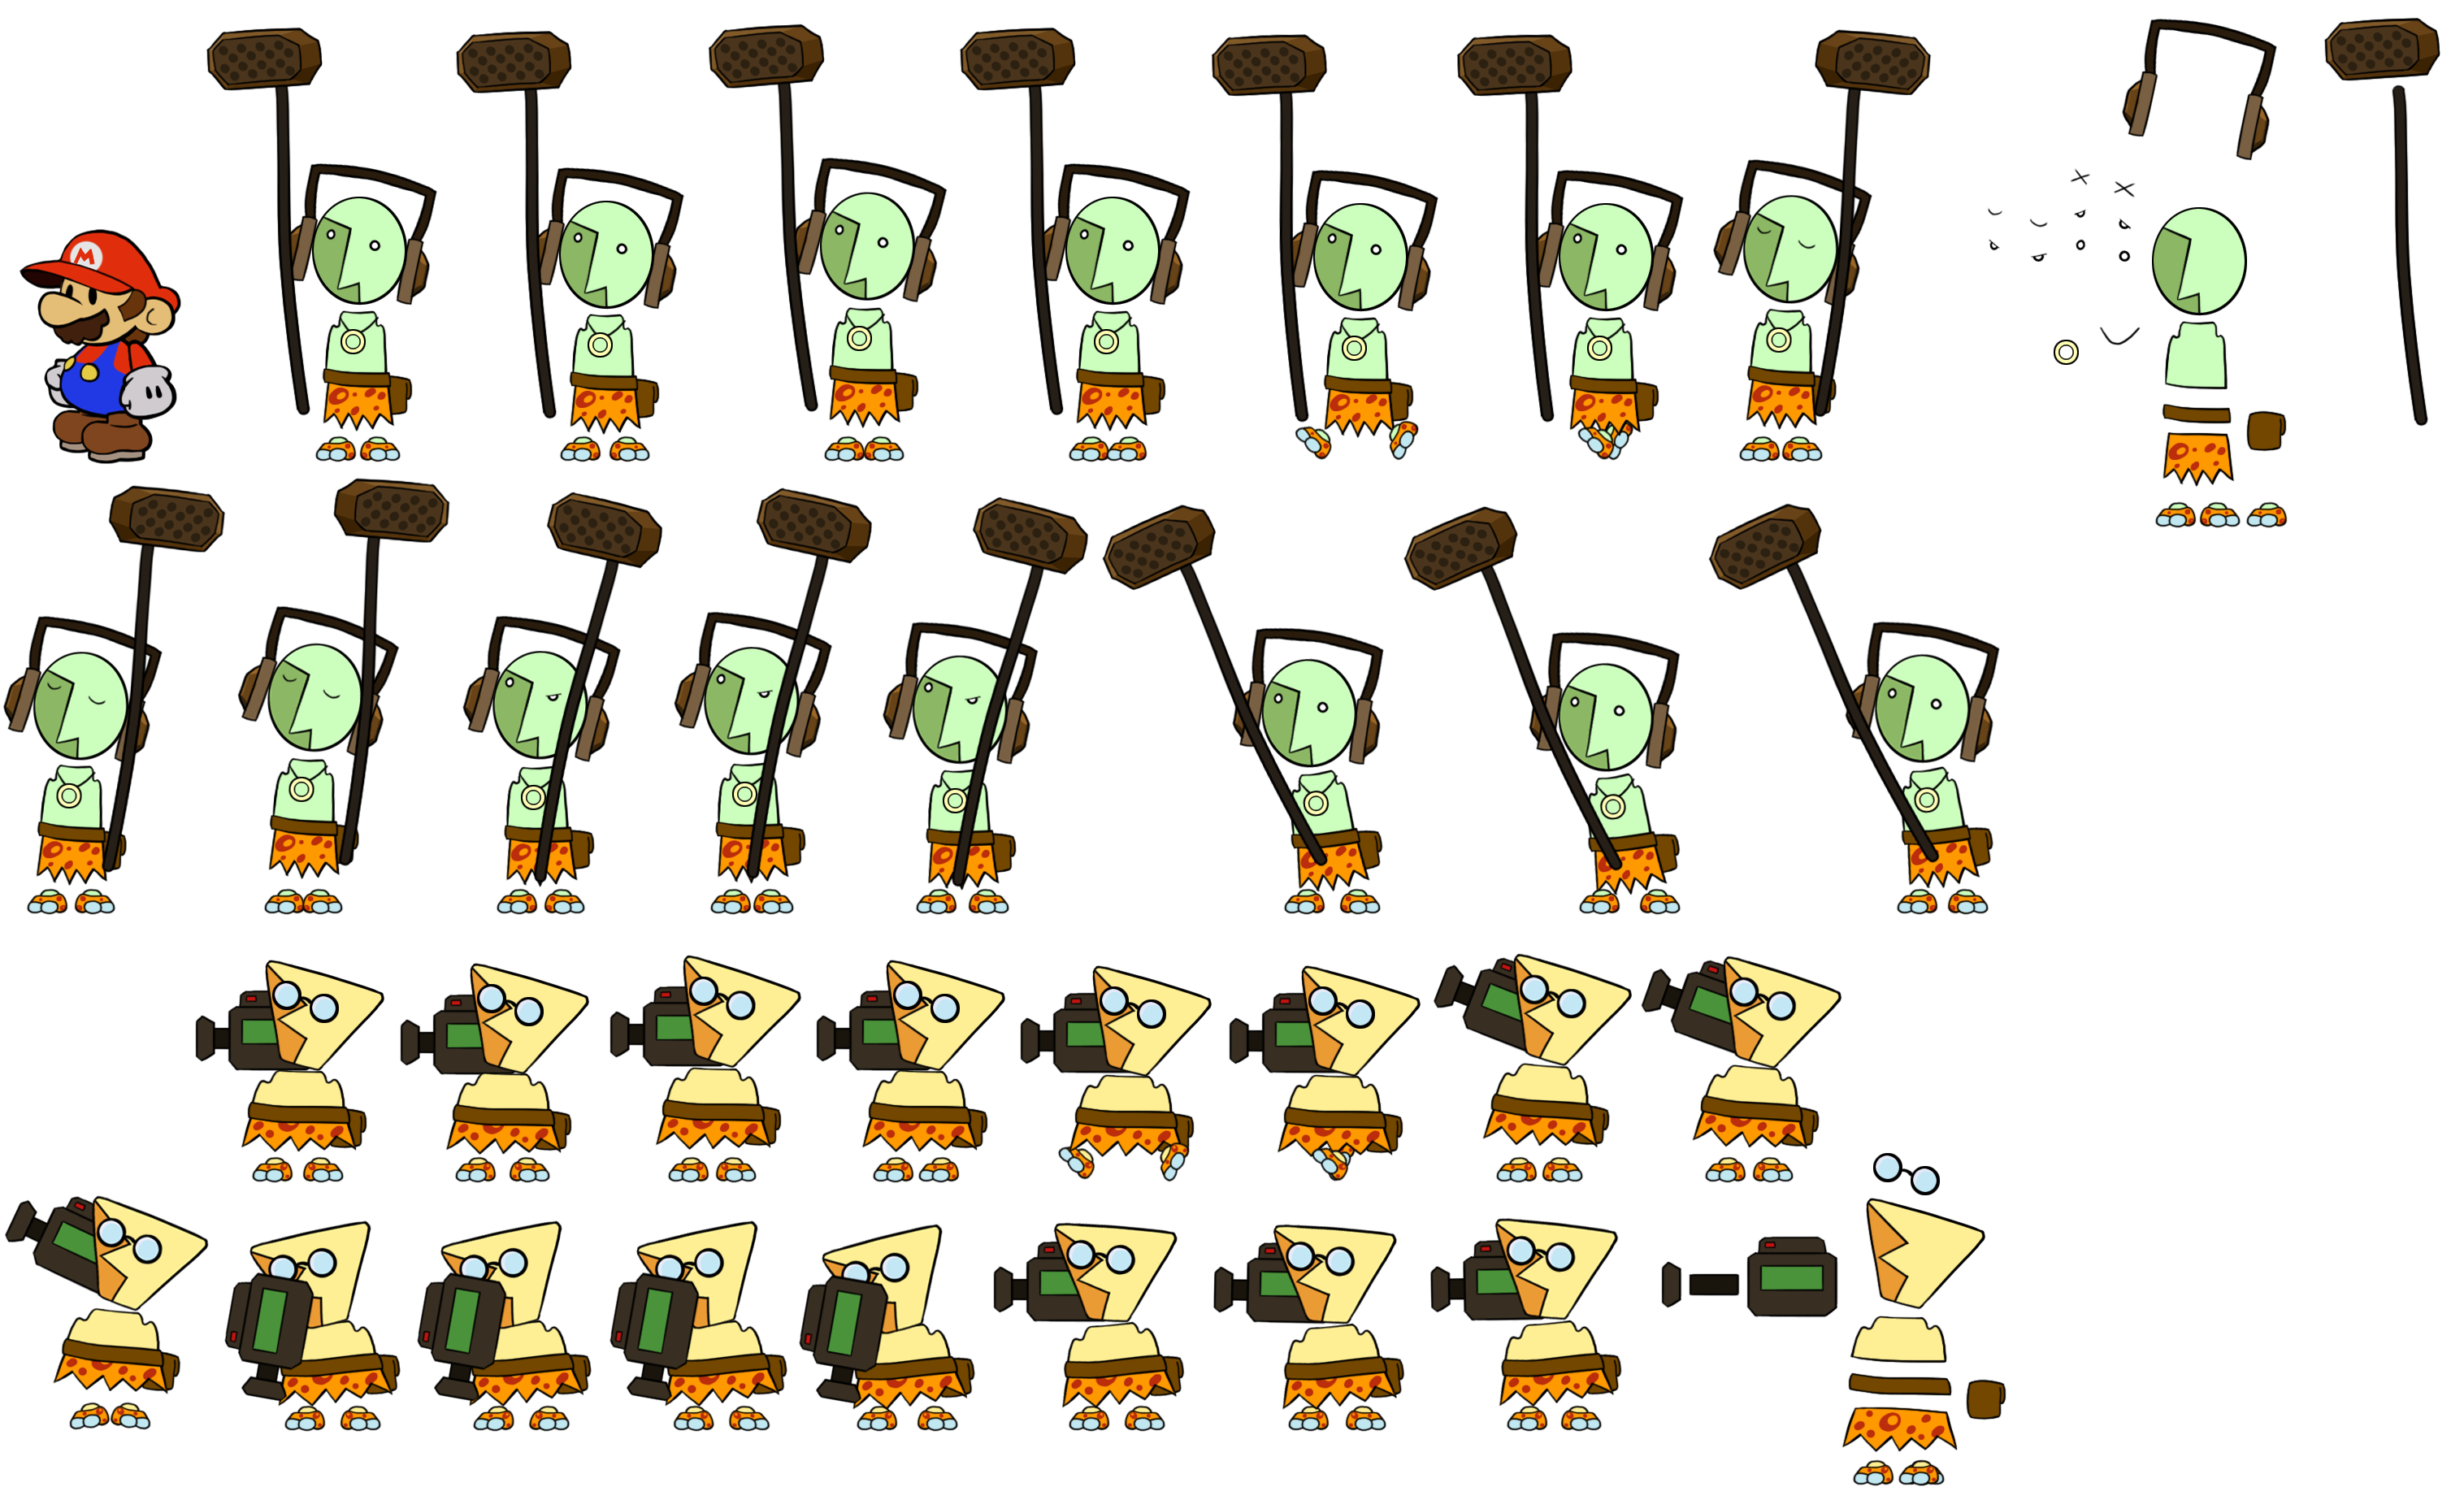 Paper Mario Customs - Hornfels and Monzo (Paper Mario-Style)